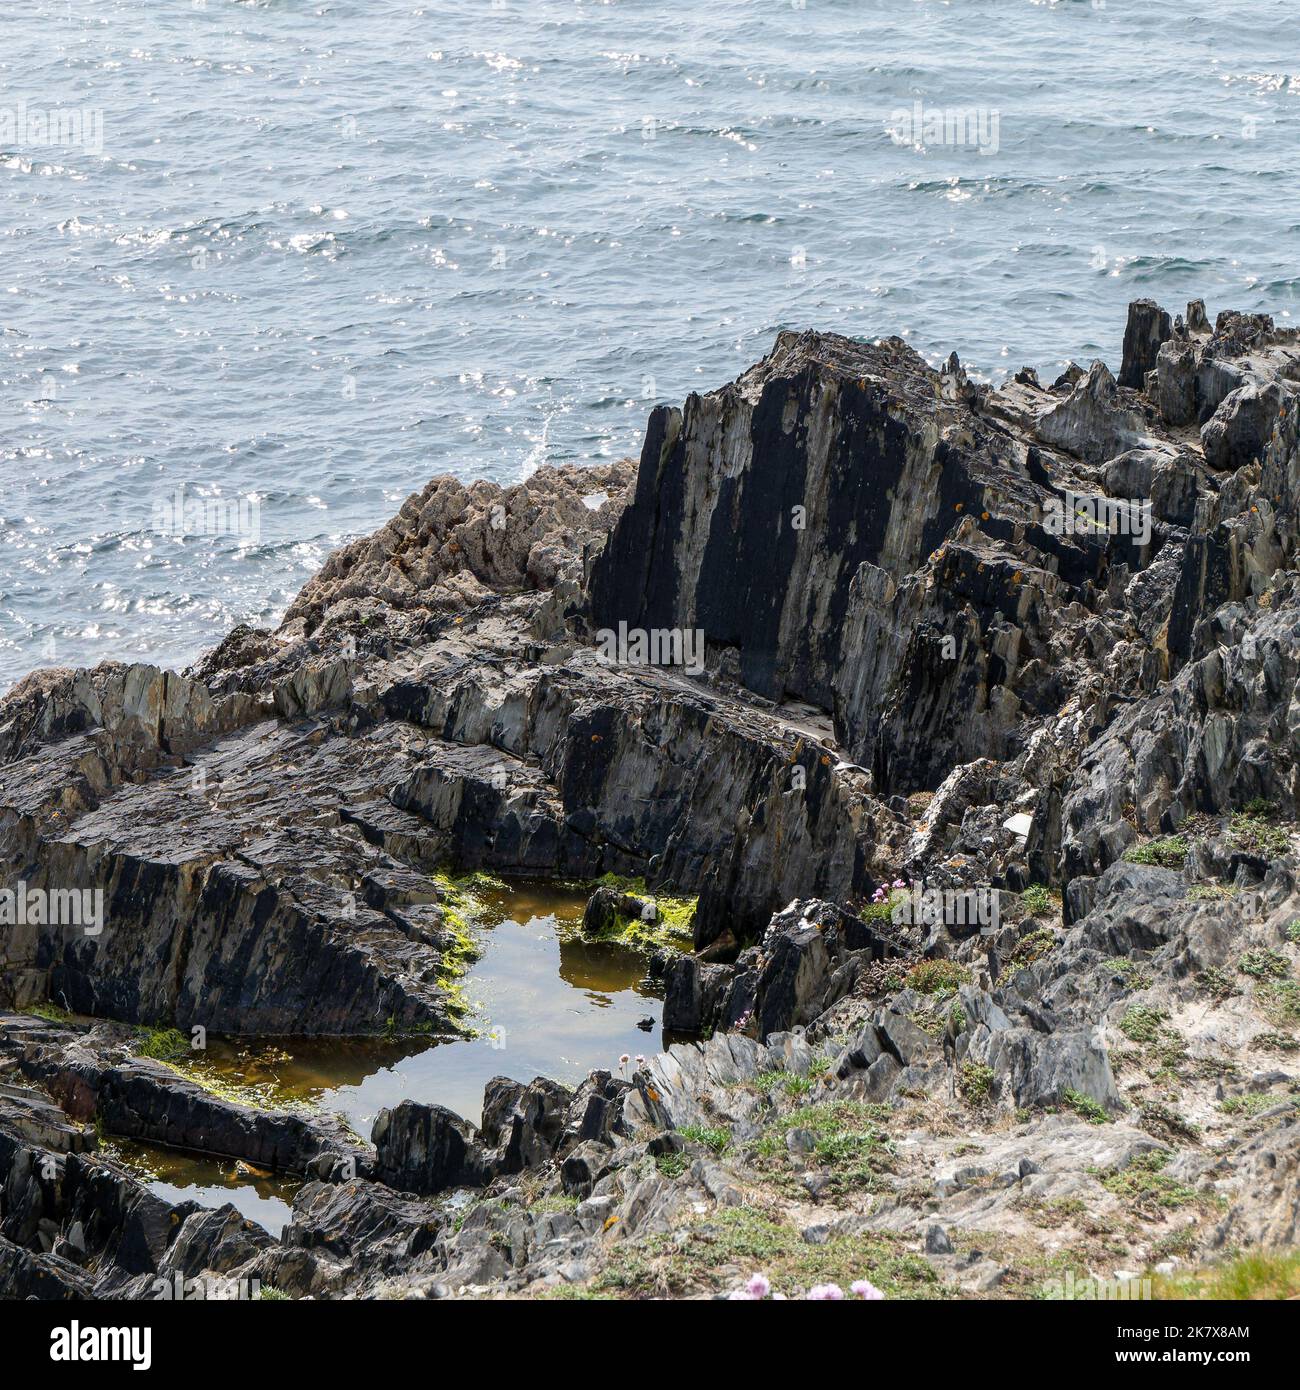 Exposed rocks on the seashore. Seaside rocks in sunny weather, rock formation near body of water. Stock Photo